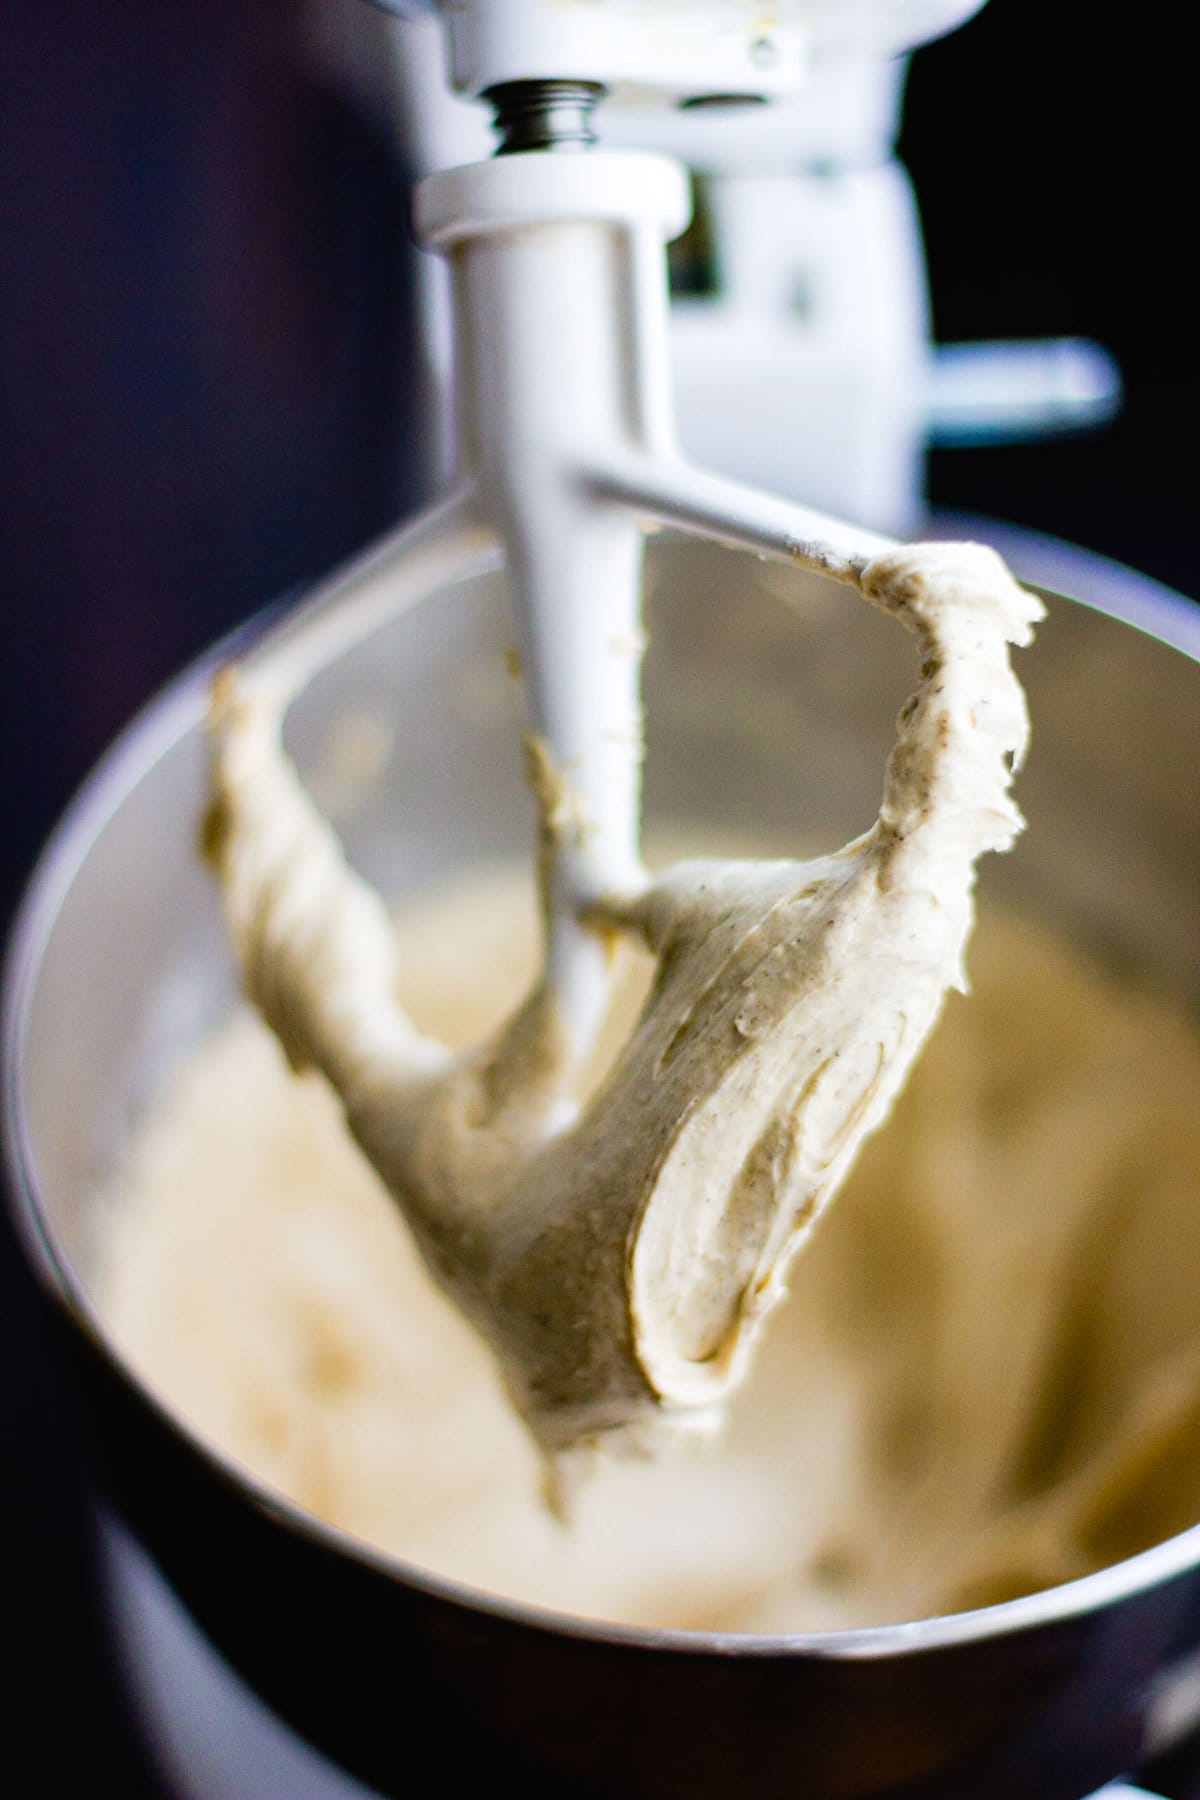 the batter has been mixed in a stand mixer and is shown on the paddle looking buttery and inviting